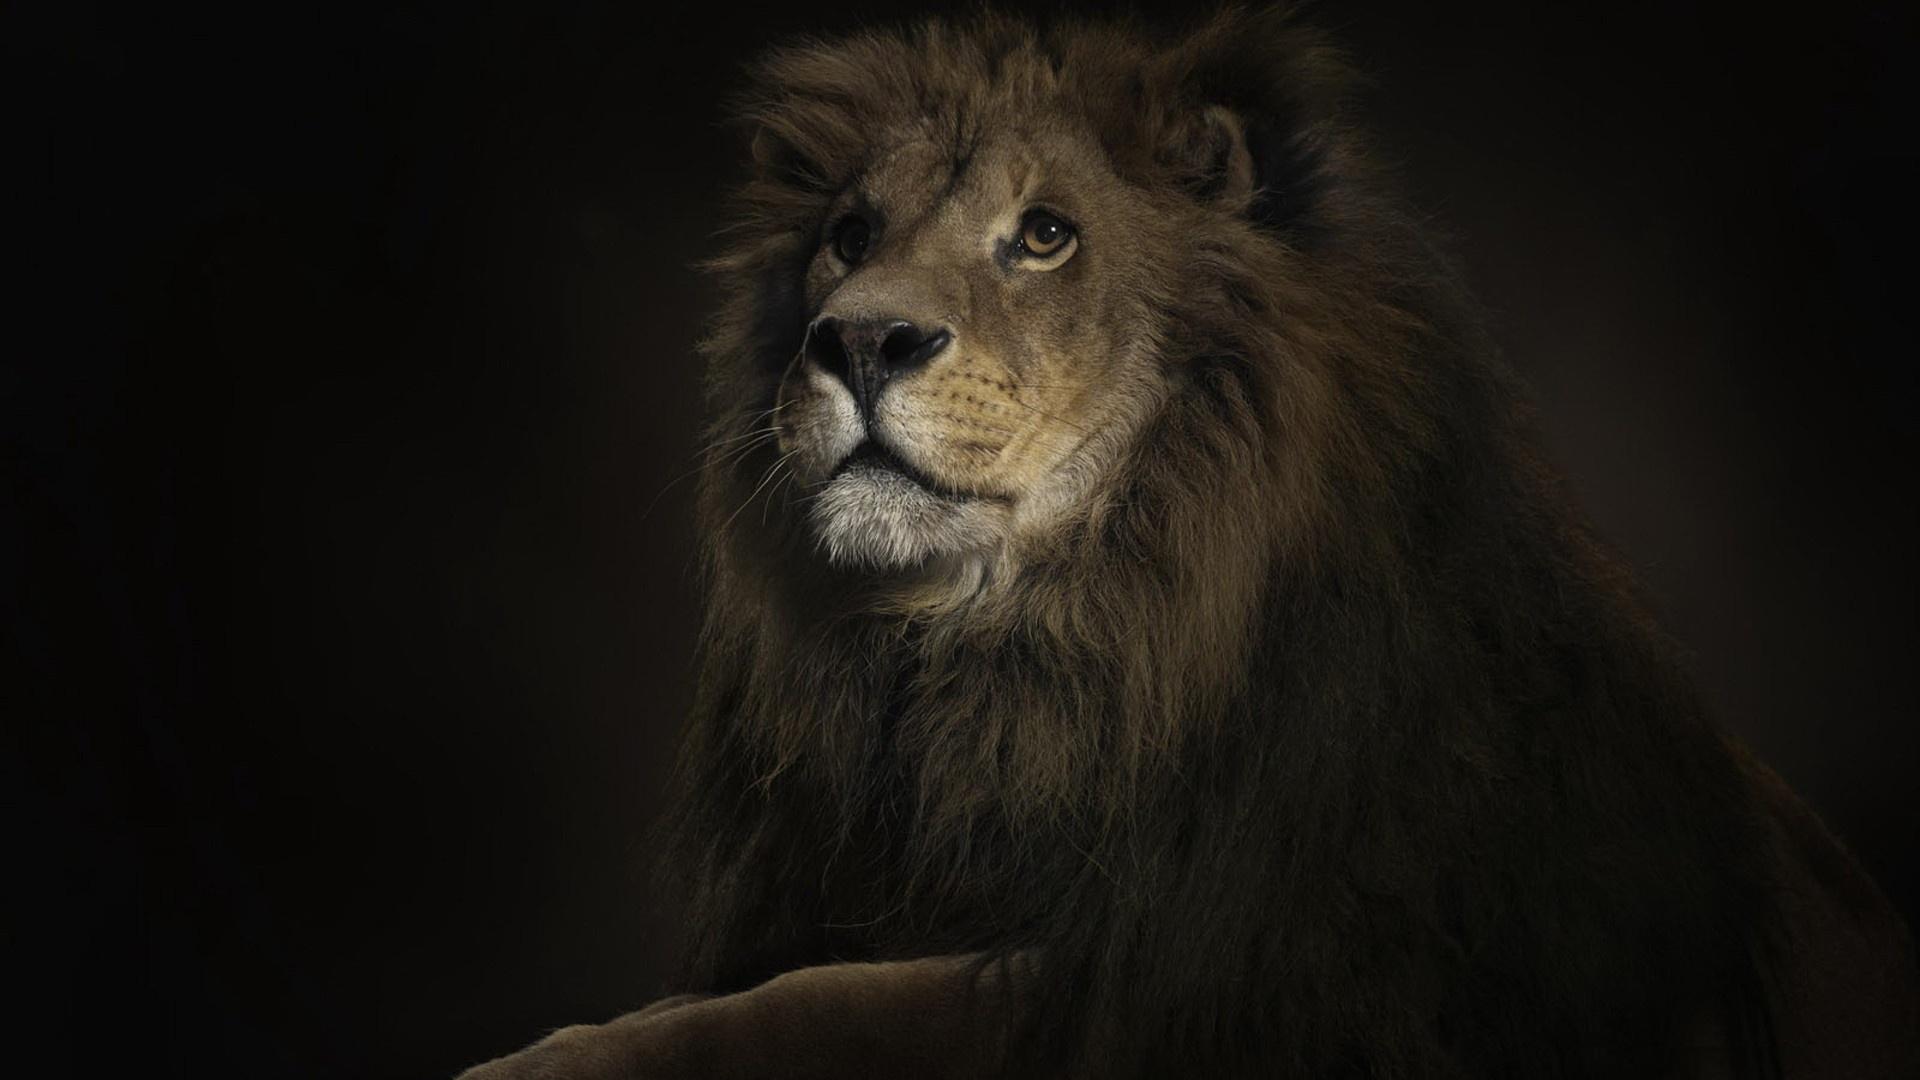 Regal lion standing proudly as the leader of the pride in a stunning high-definition desktop wallpaper.